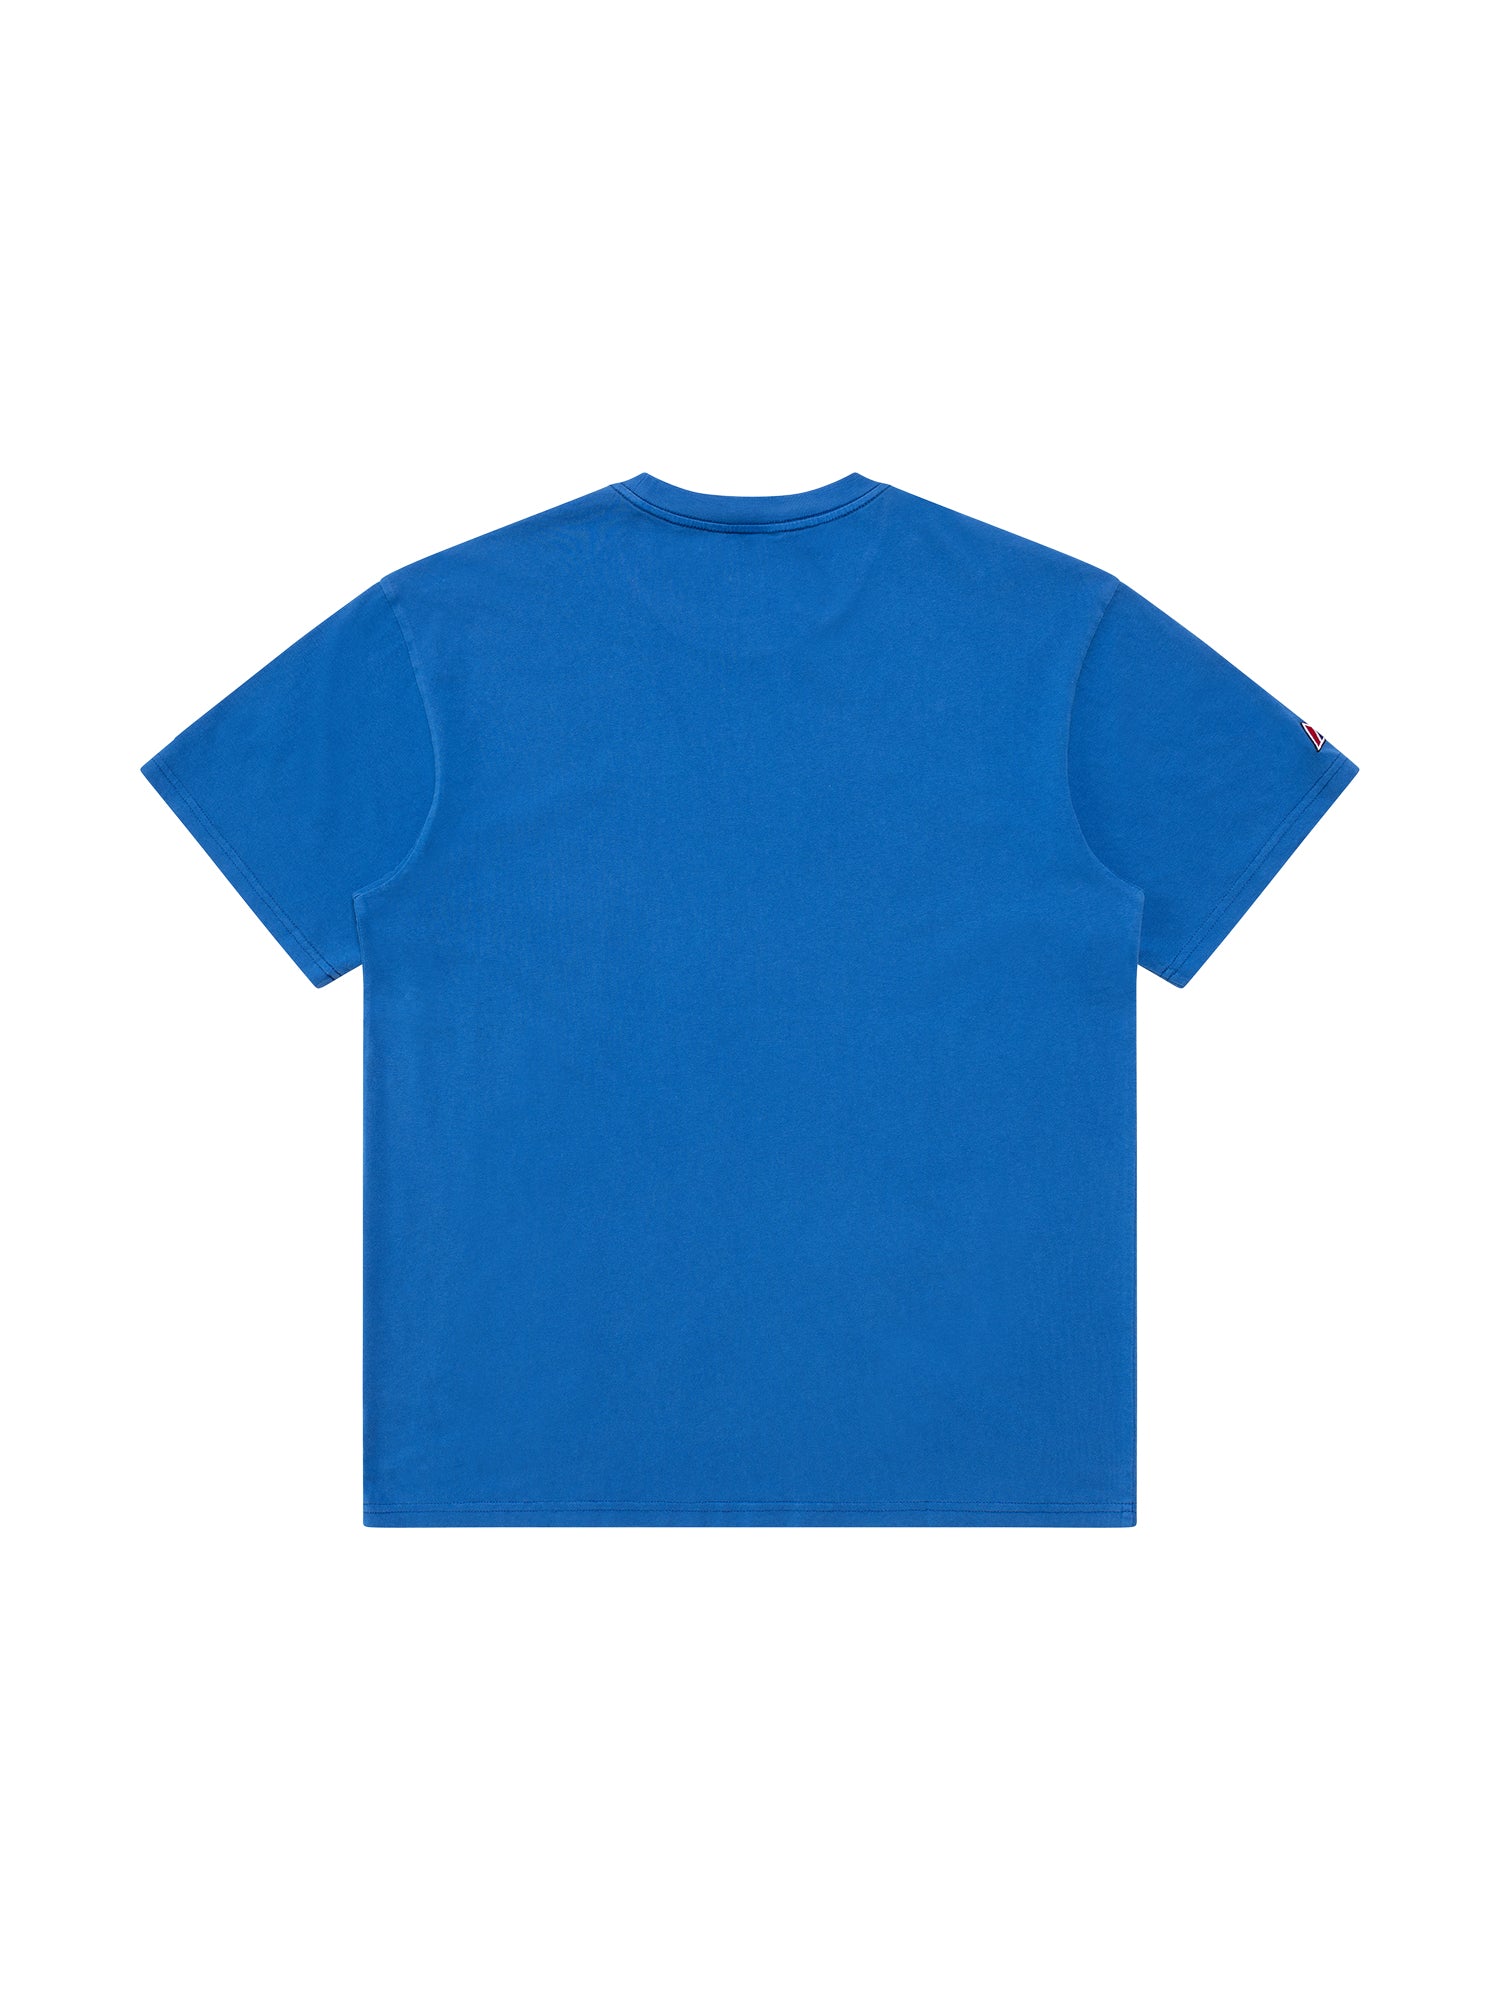 MJA-H11 (Majestic cracked puff arch tee dodgers faded royal) 72393478